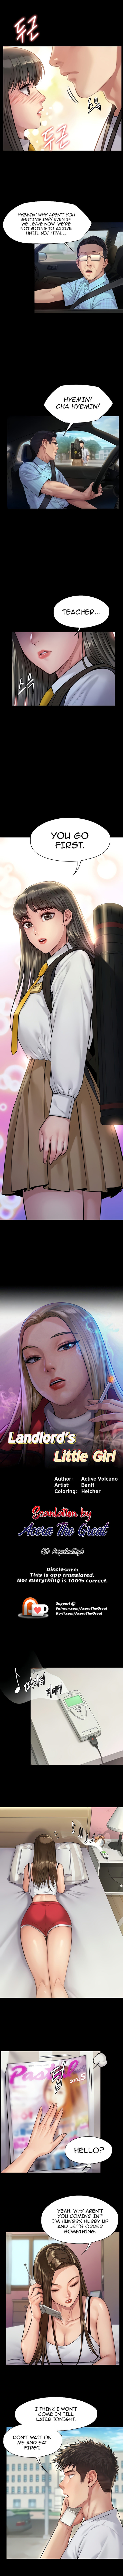 Panel Image 1 for chapter 193 of manhwa Queen Bee on read.oppai.stream